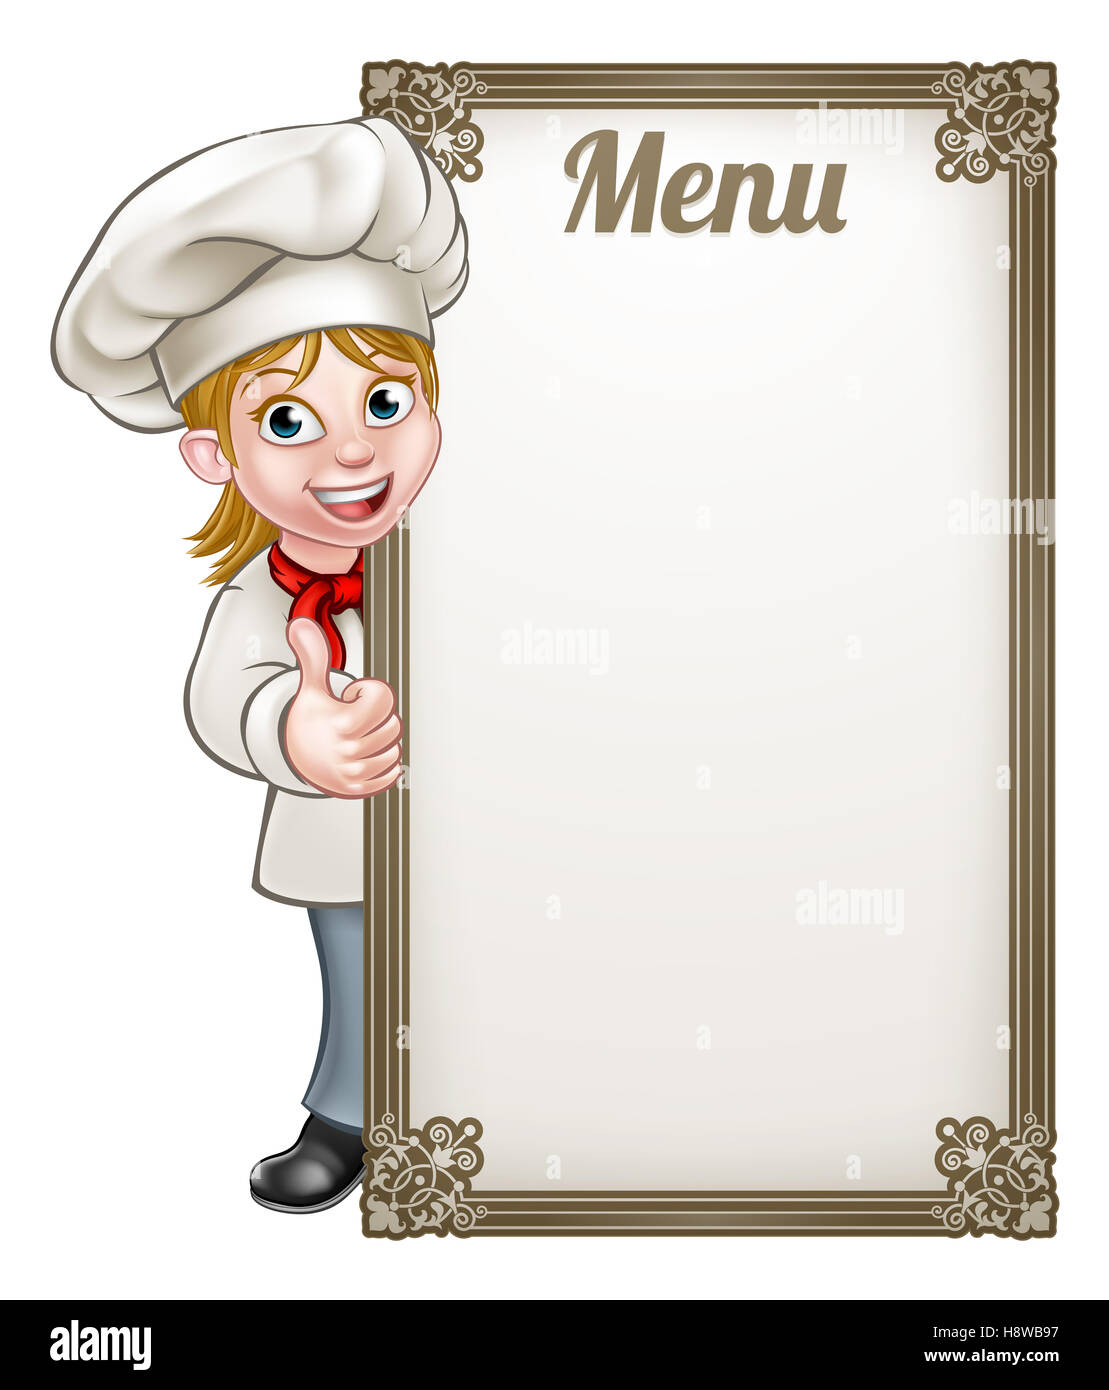 Cartoon female woman chef or baker character giving thumbs up with menu sign board Stock Photo